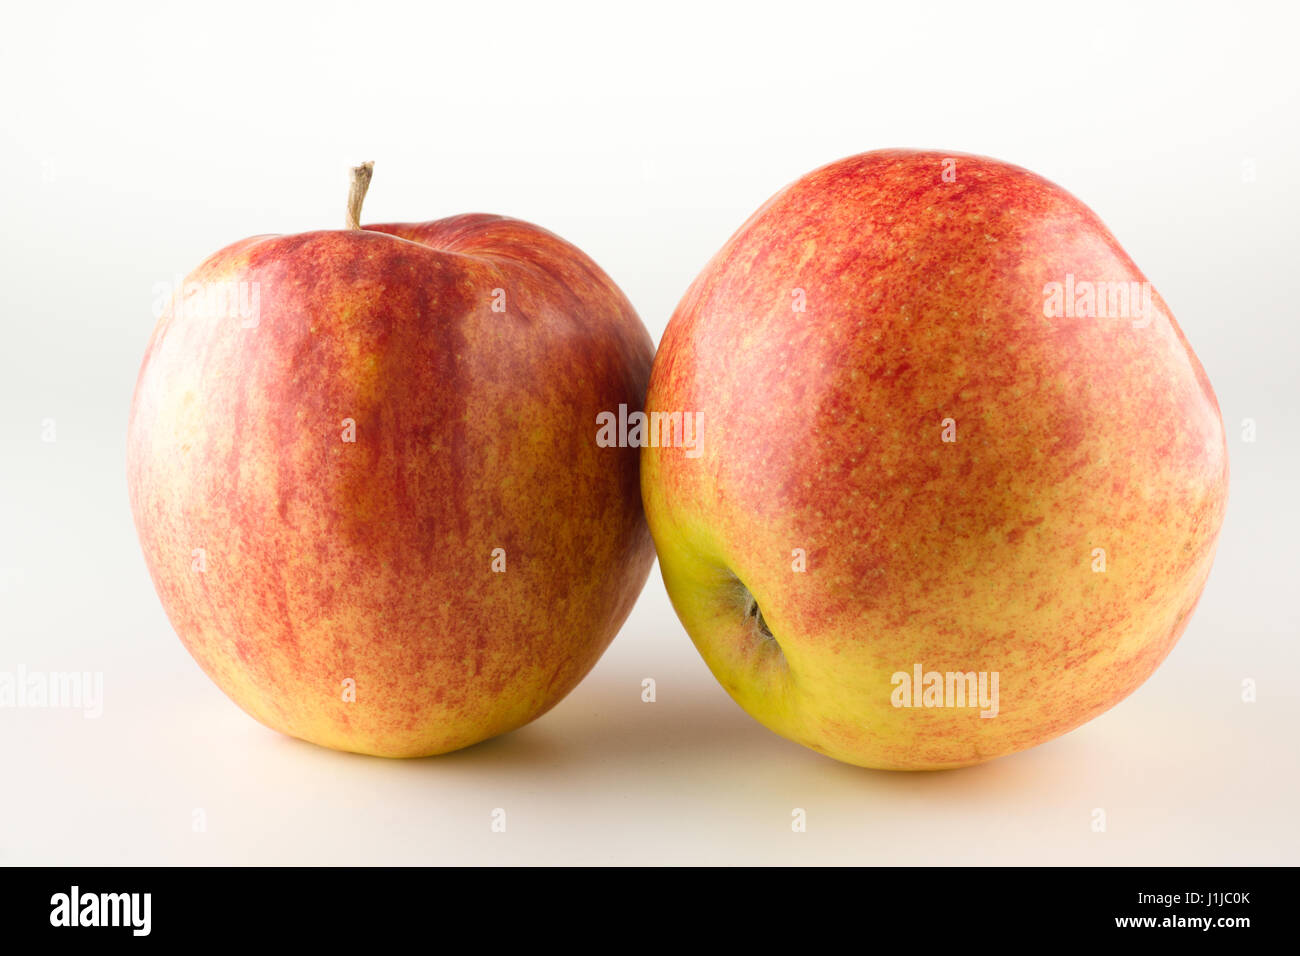 Red ripe apple on a white background Stock Photo